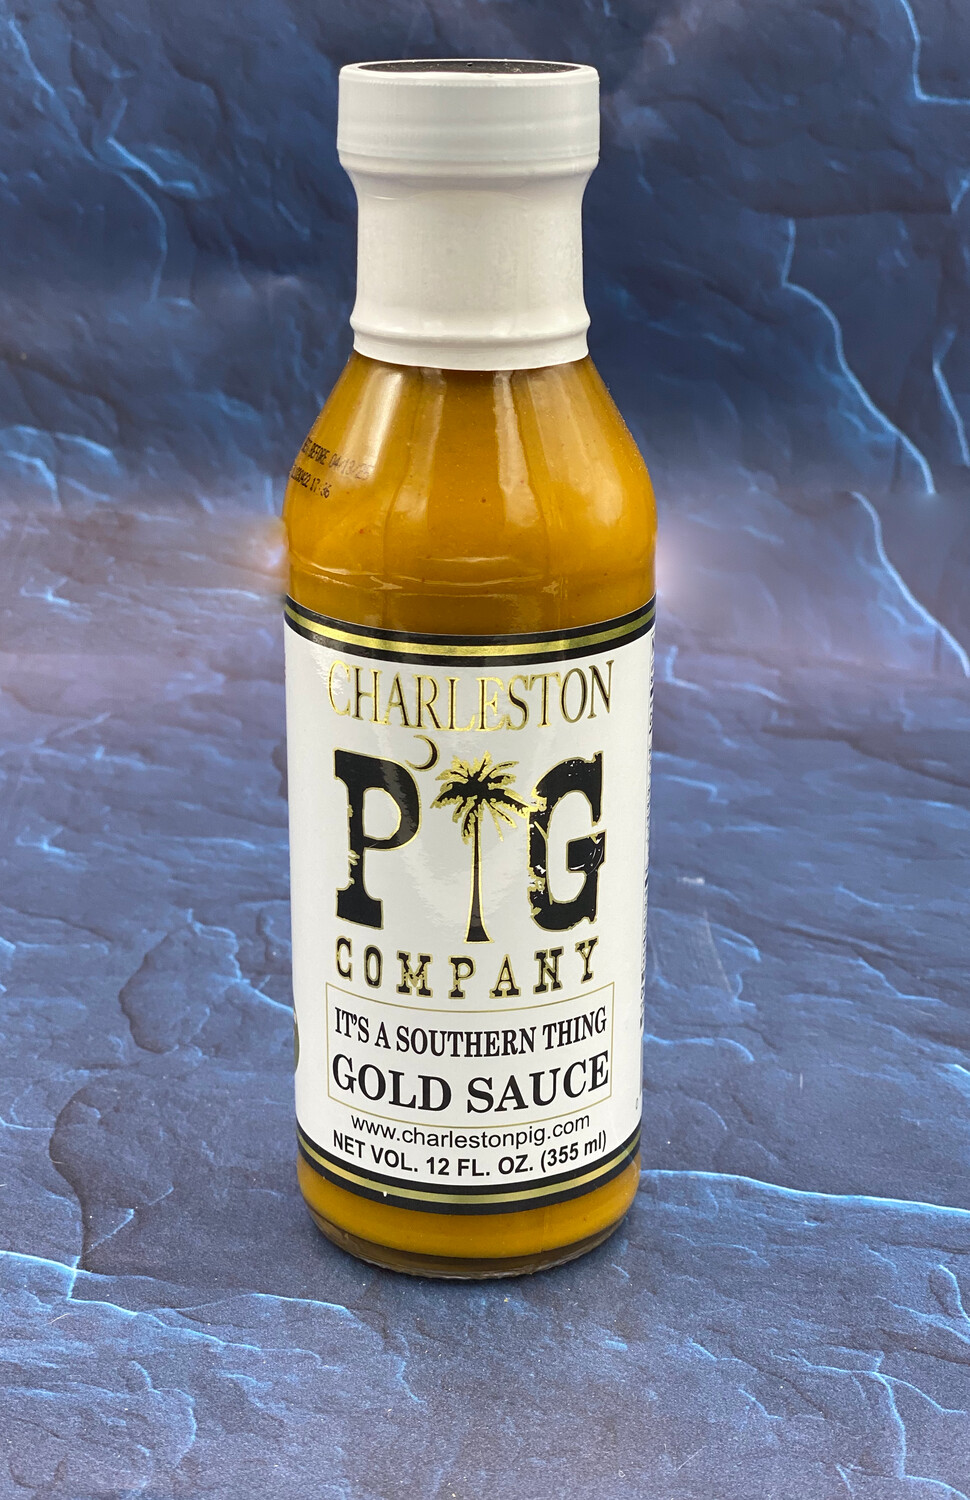 It's a Southern Thing Gold Sauce Charleston Pig